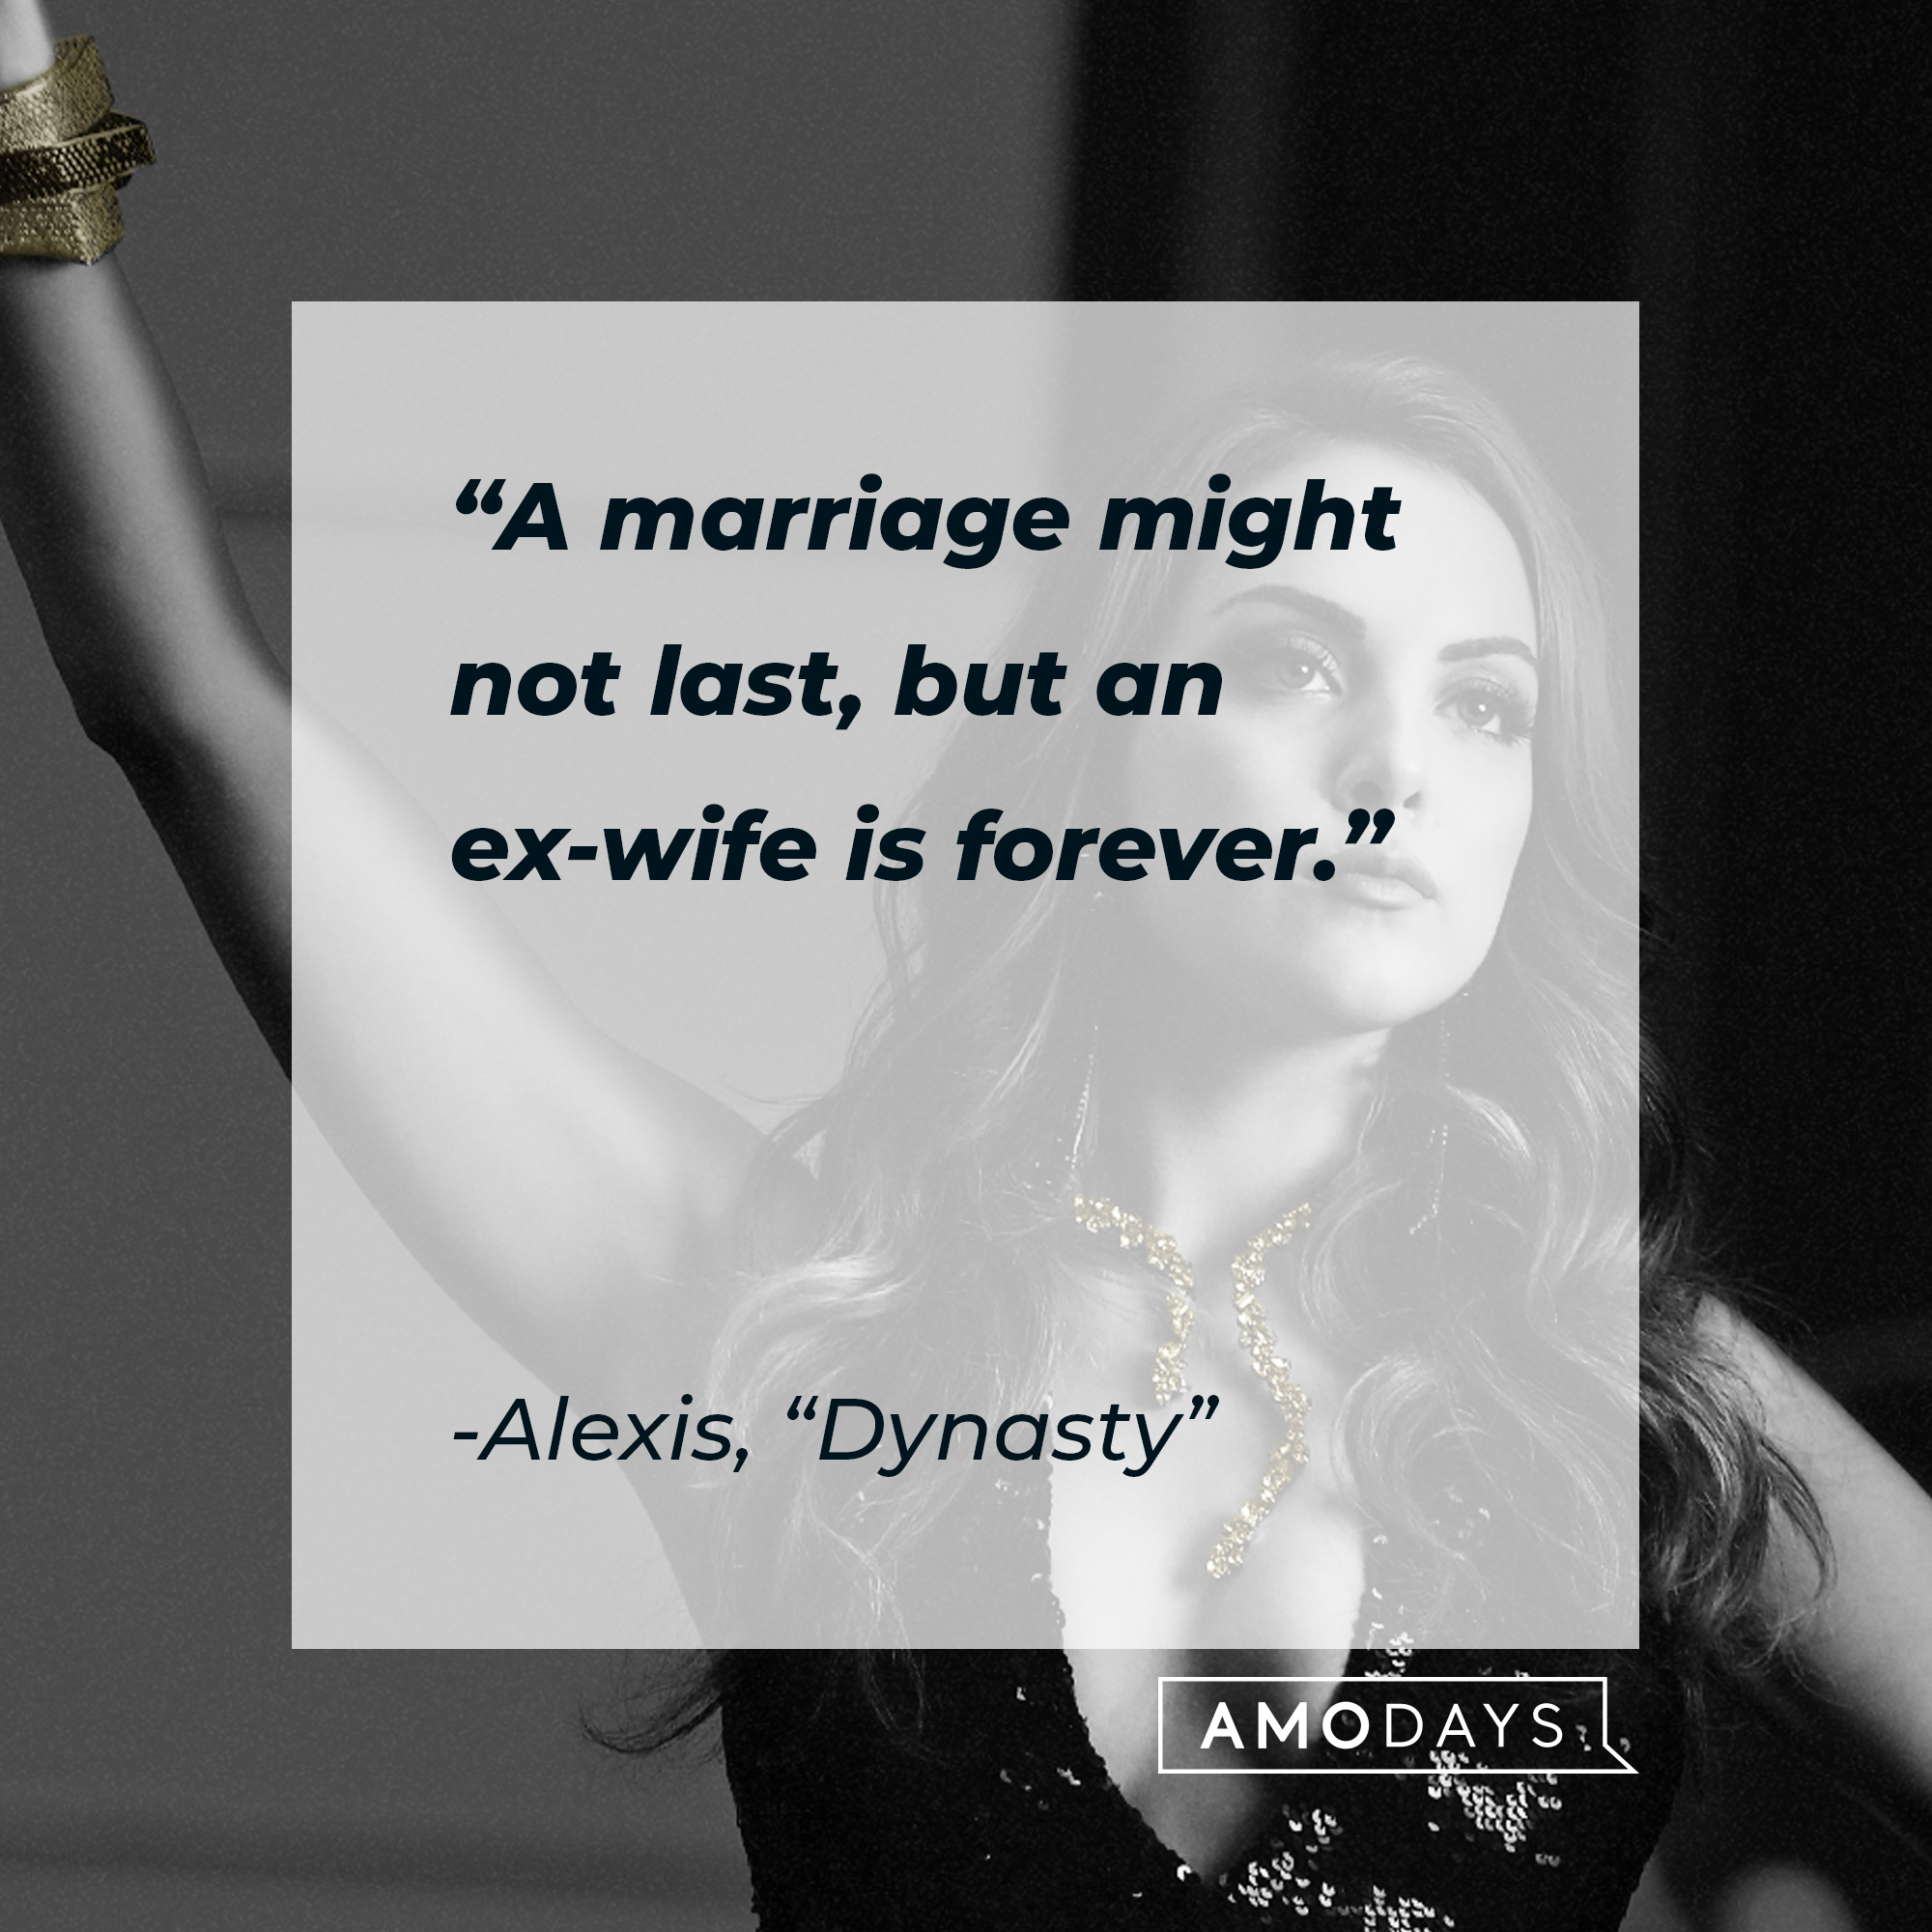 Alexis’s quote from “Dynasty”: “A marriage might not last, but an ex-wife is forever.” | Source: facebook.com/DynastyOnTheCW